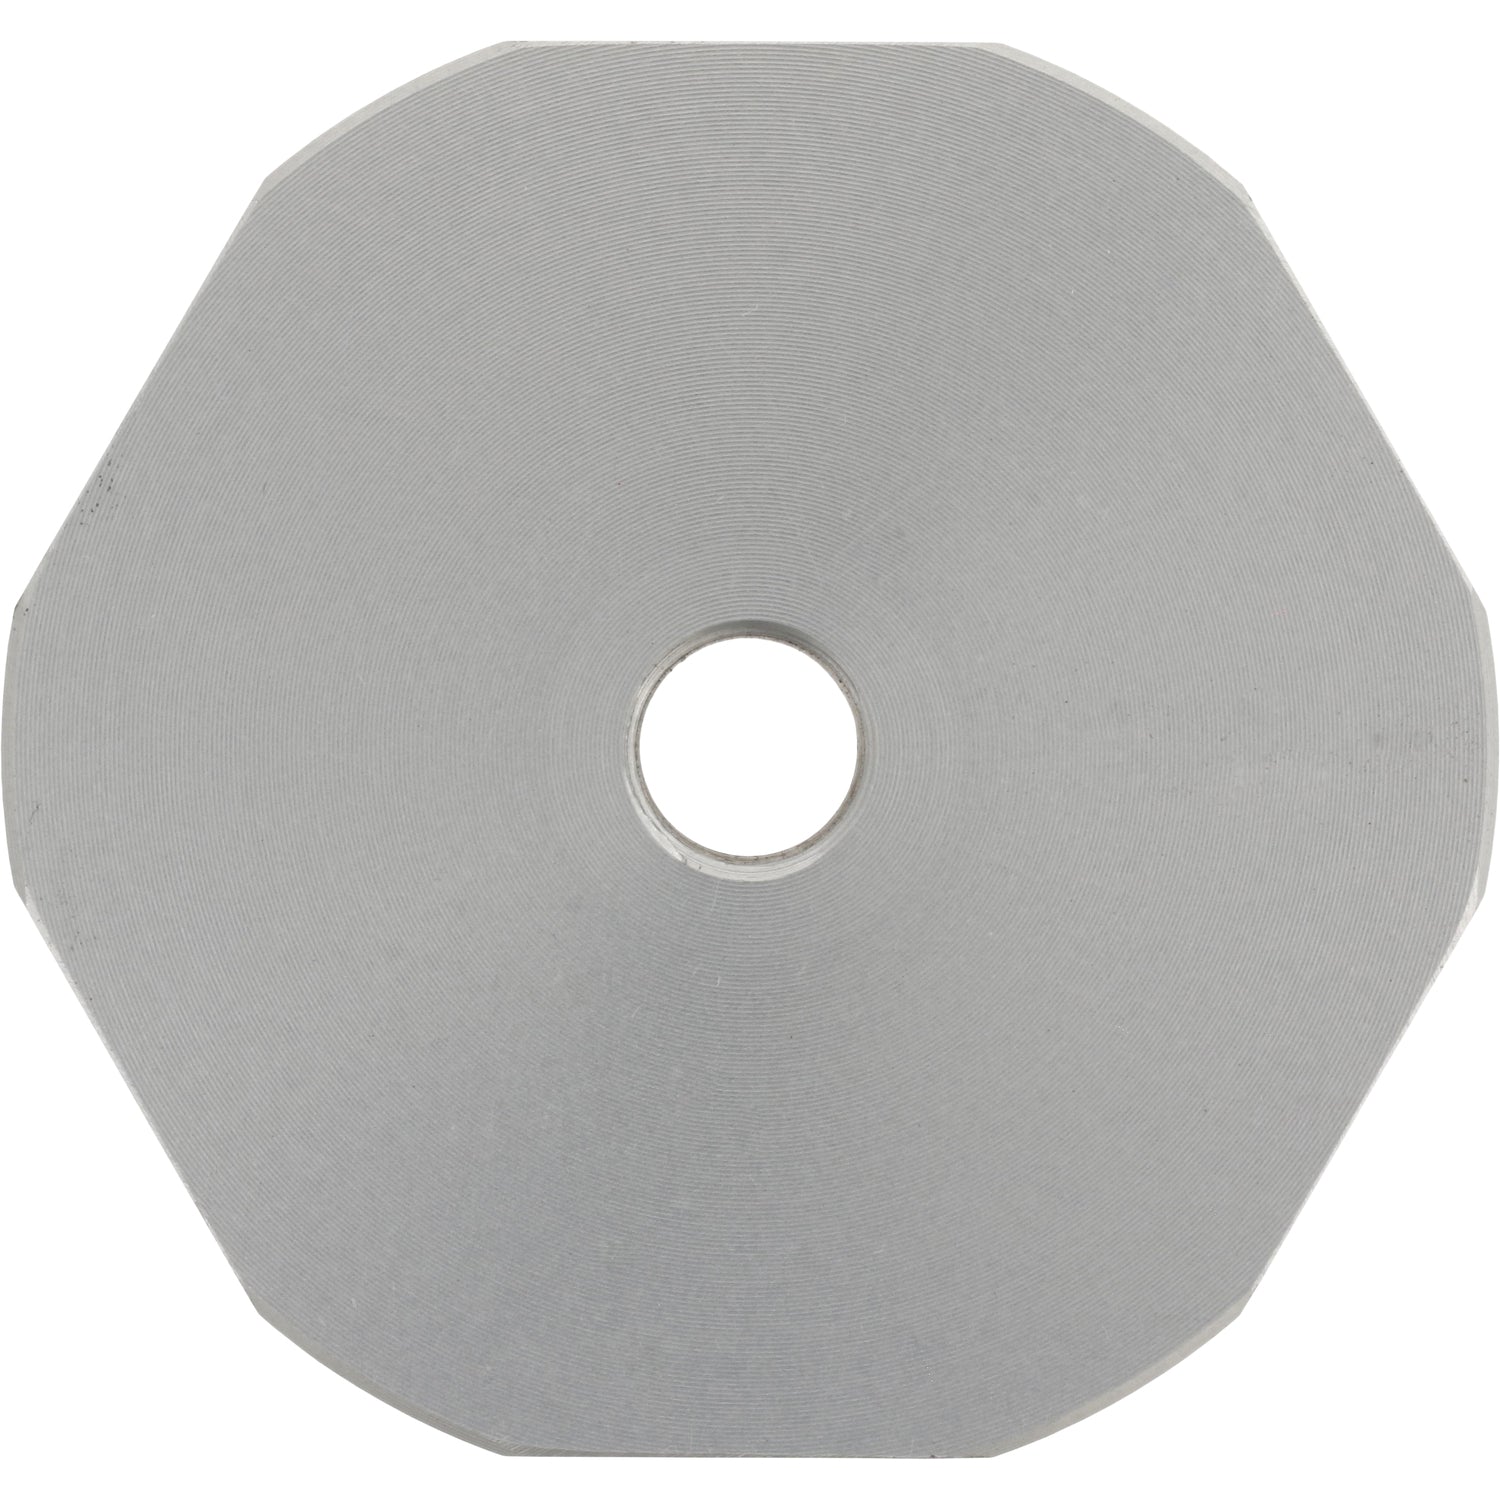 Grey hard anodized aluminum decagonal part with center through hole shown on white background.